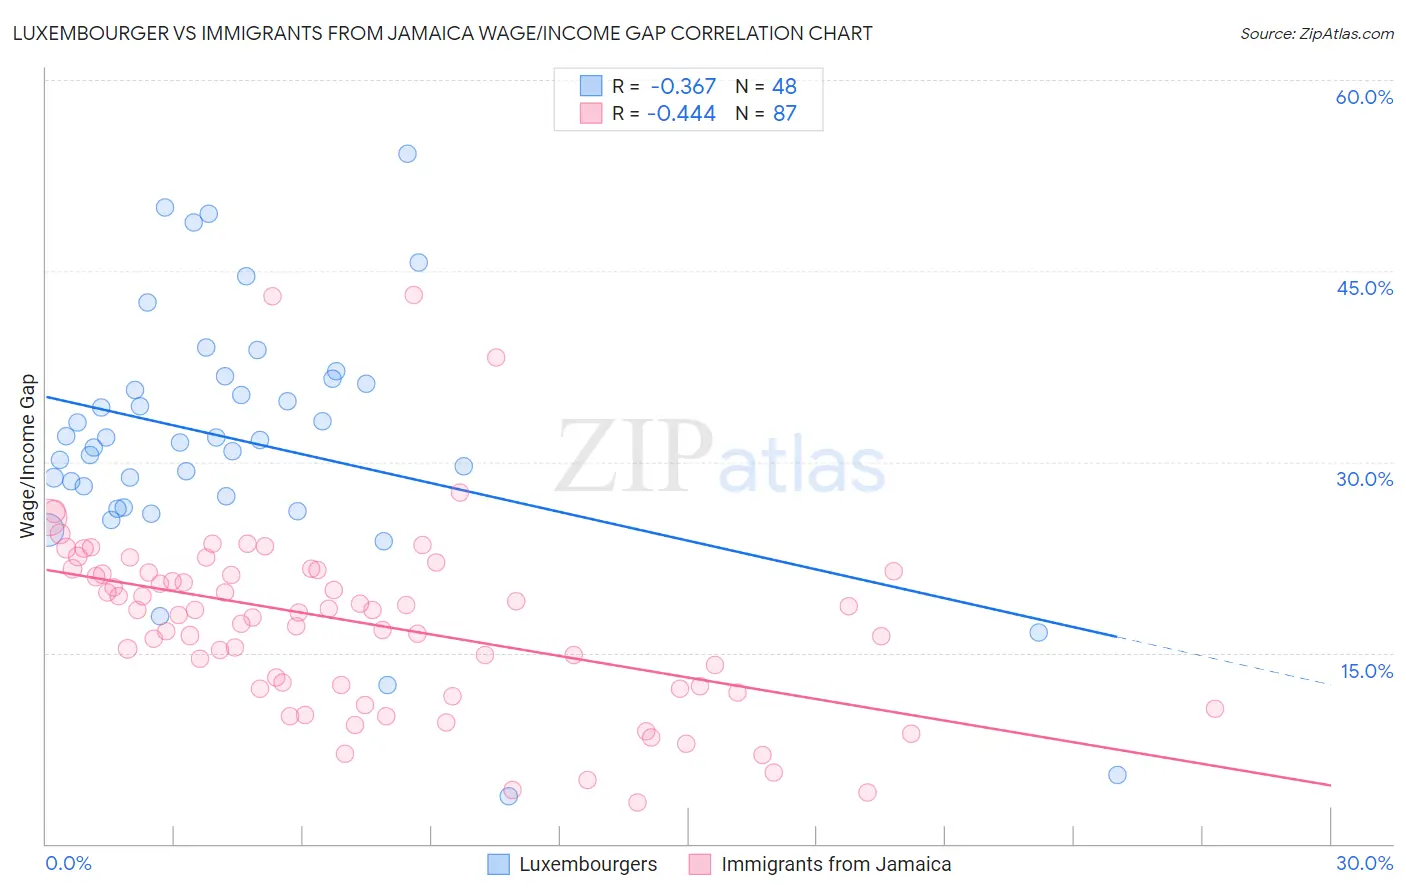 Luxembourger vs Immigrants from Jamaica Wage/Income Gap